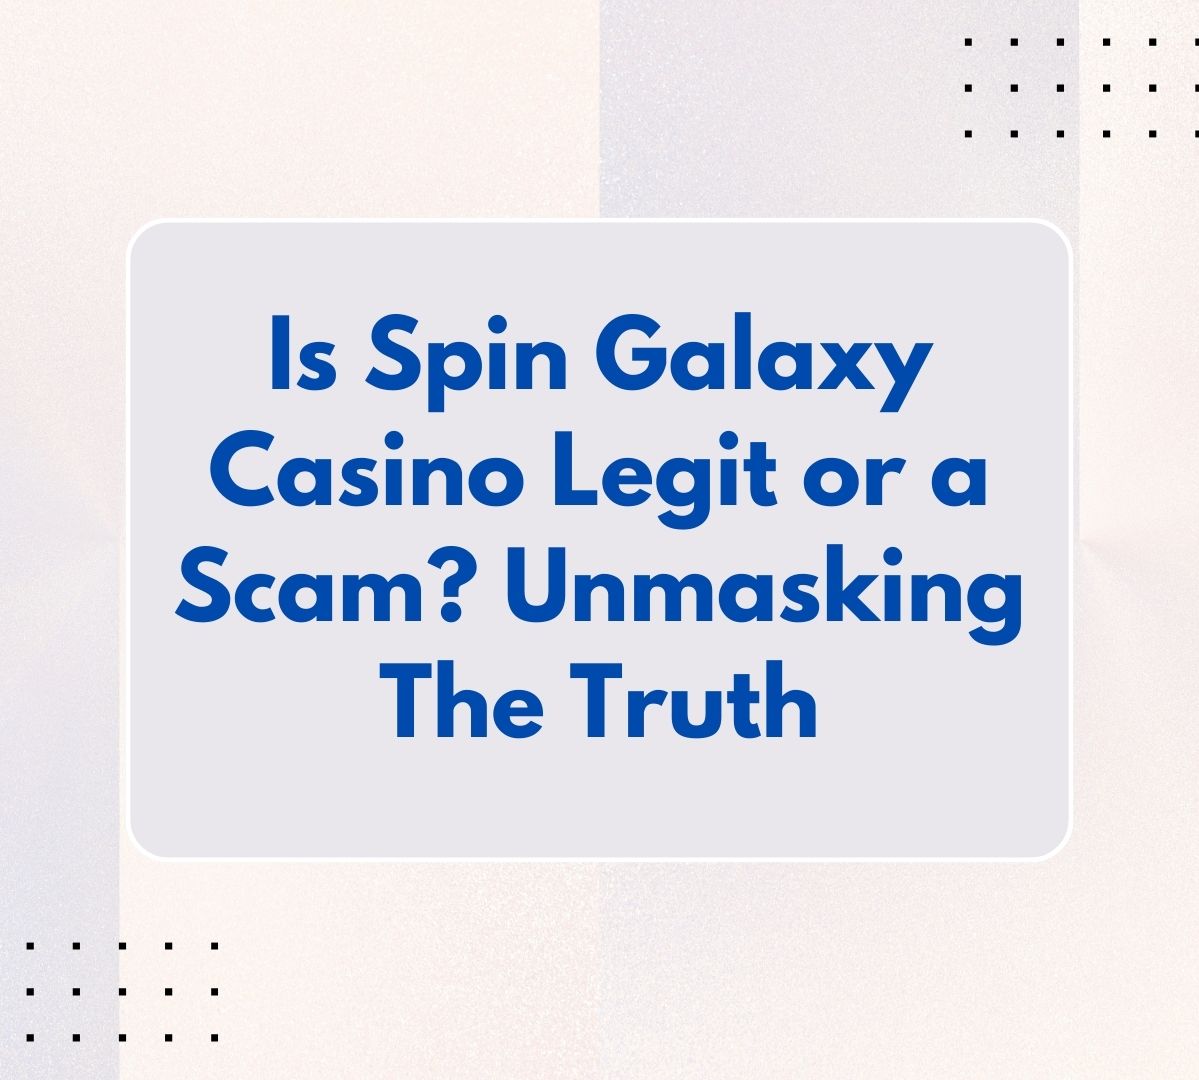 Is Spin Galaxy Casino Legit or a Scam? Unmasking The Truth